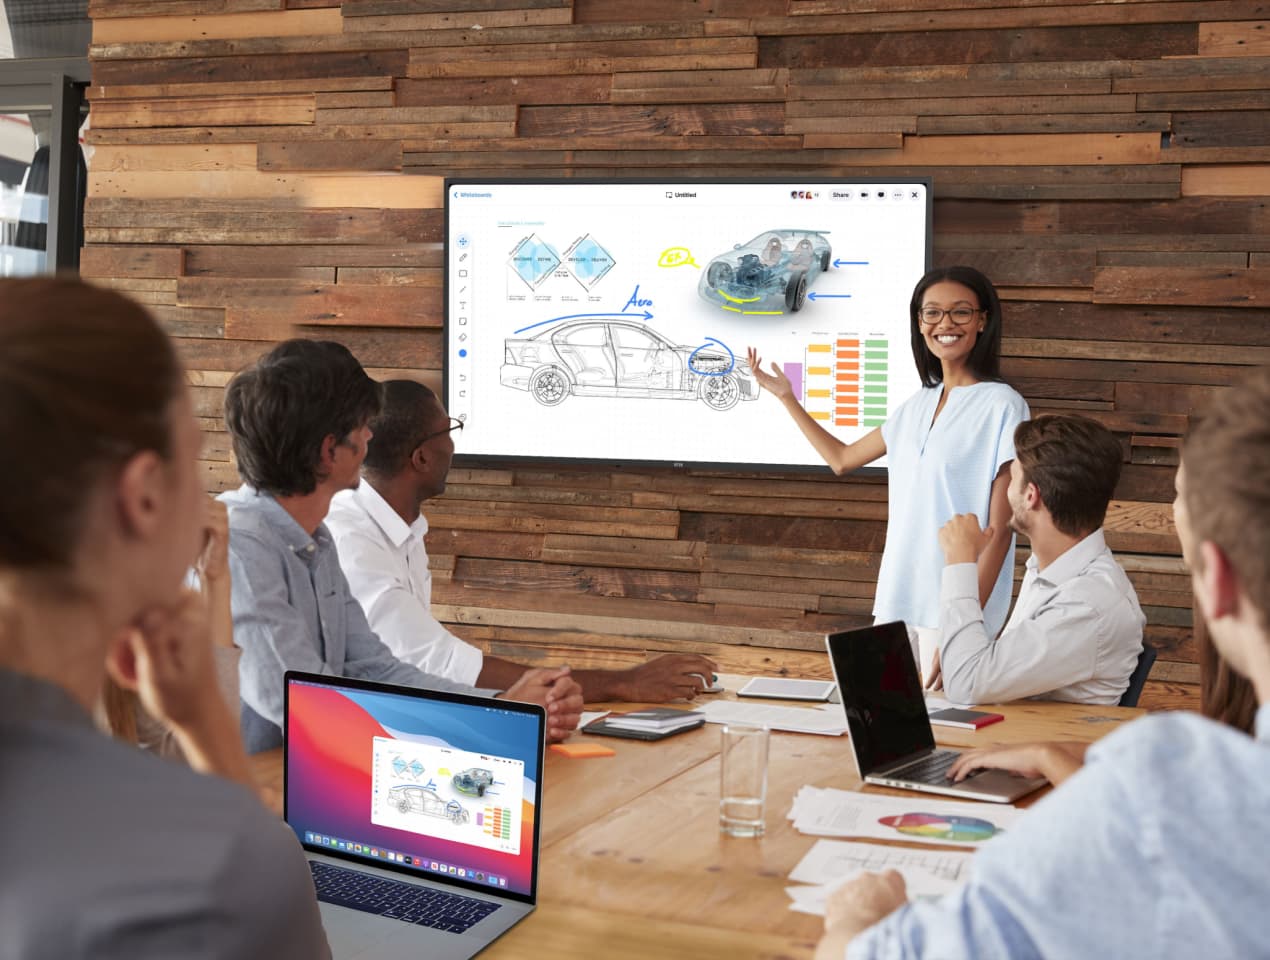 Office workers focused on whiteboard in conference room